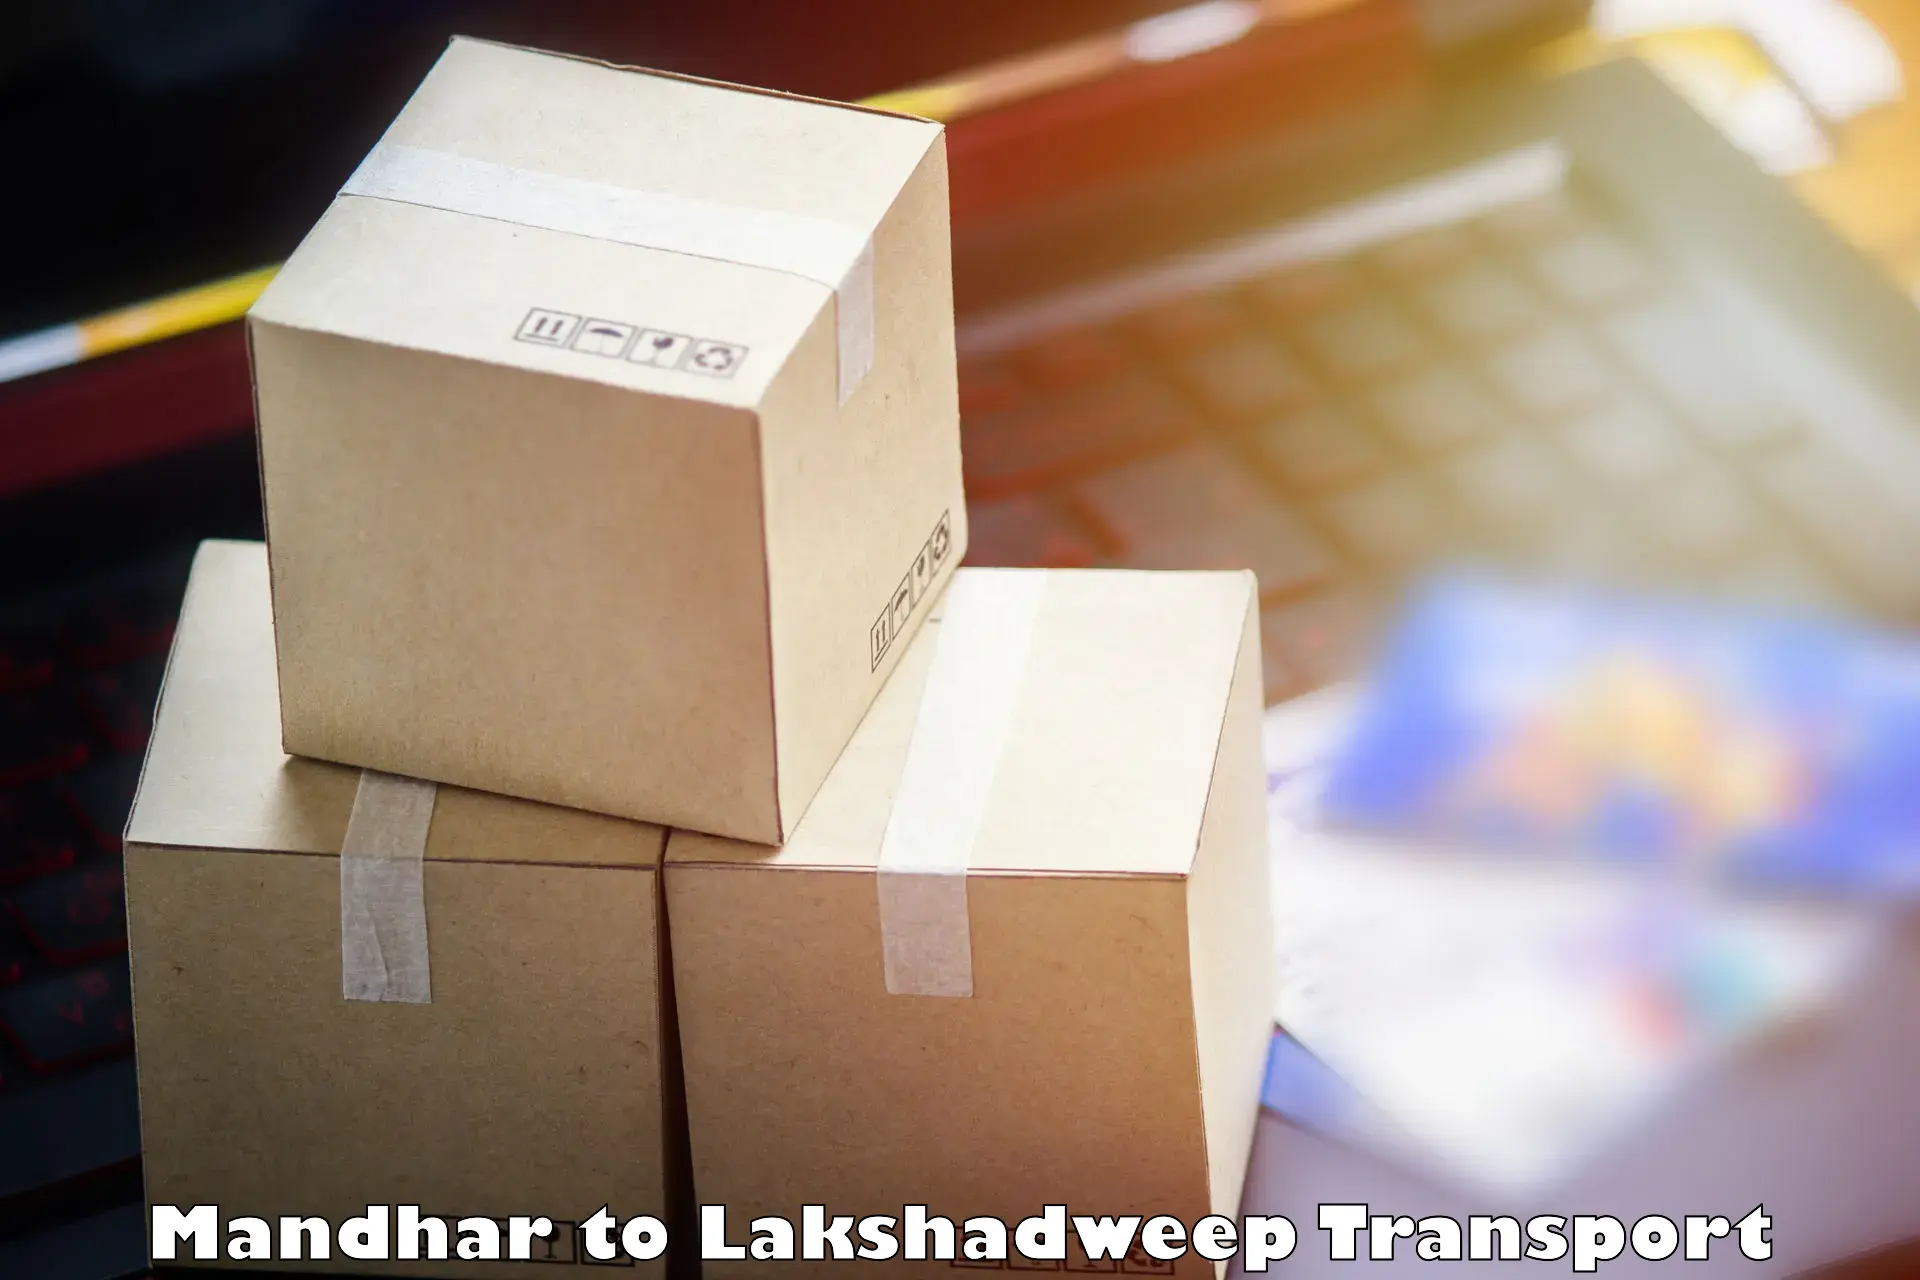 Goods delivery service Mandhar to Lakshadweep